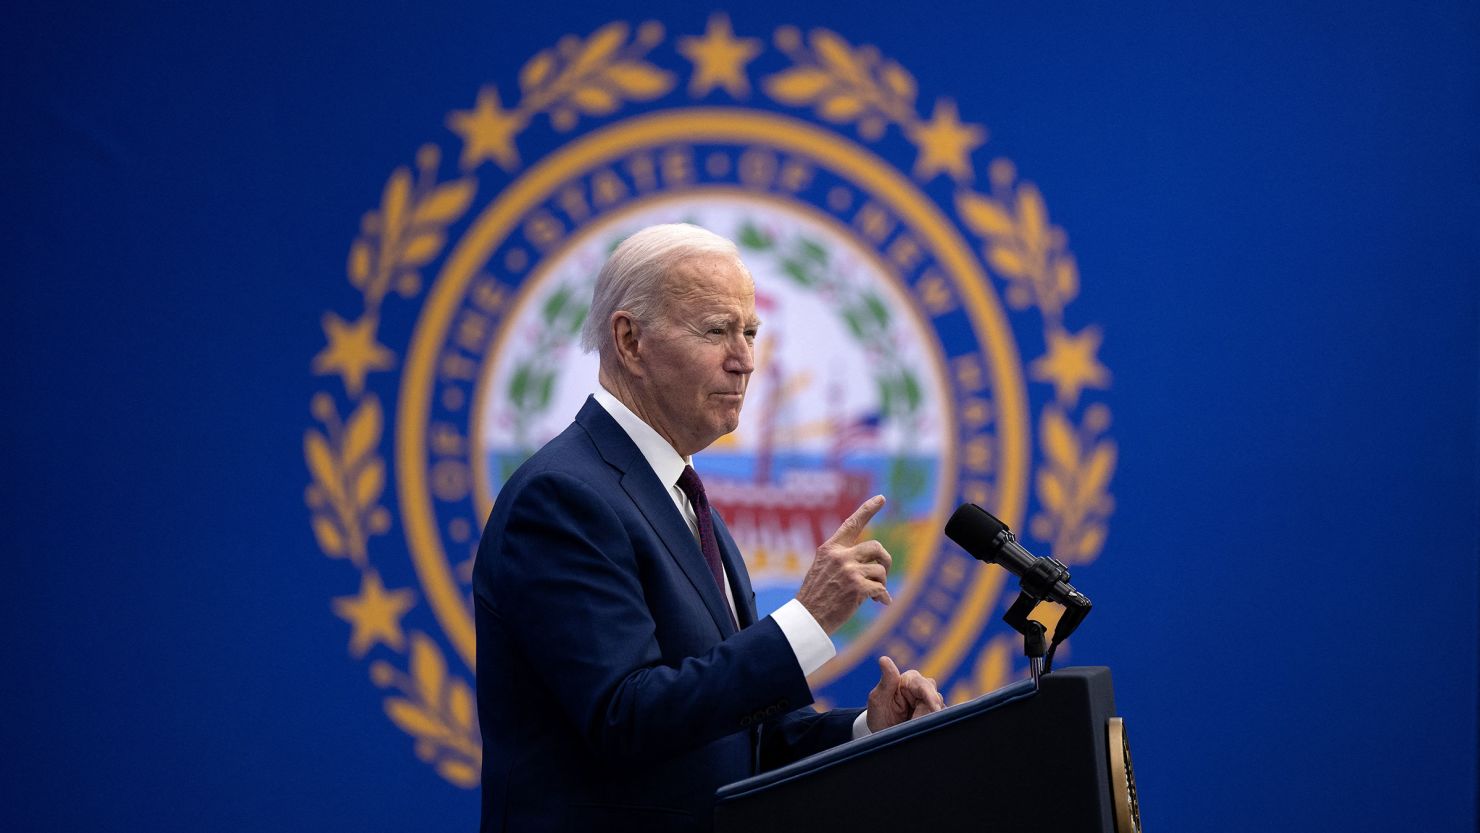 President Joe Biden speaks about the costs of living during an address at the YMCA Allard Center March 11, in Goffstown, New Hampshire.